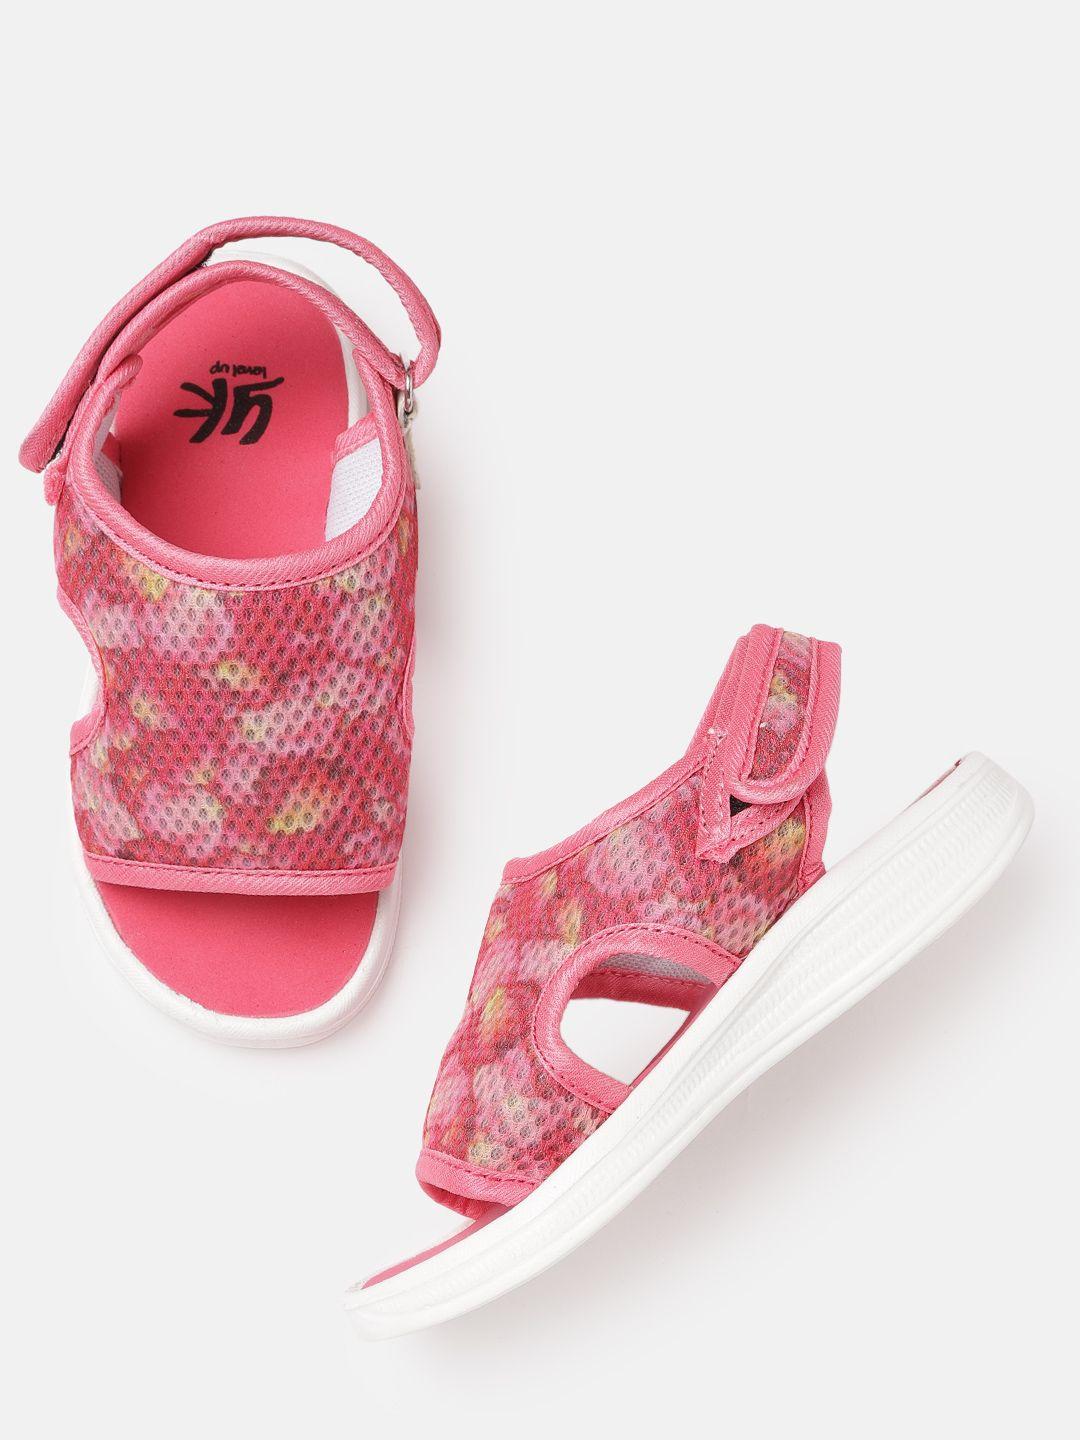 yk girls pink & red printed sports sandals